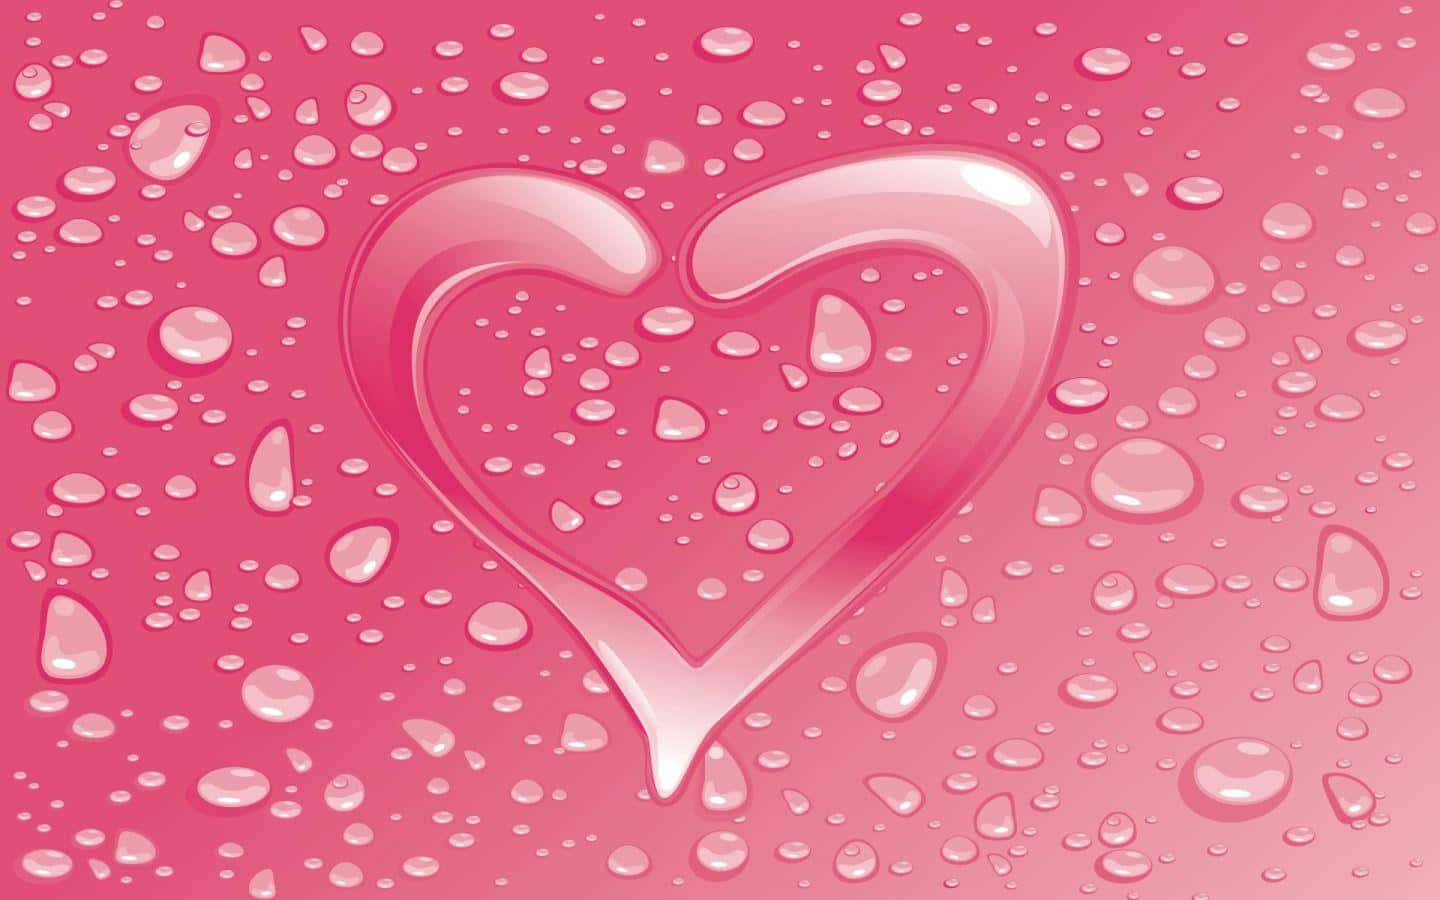 Uncover the beauty of love through this glowing pink heart